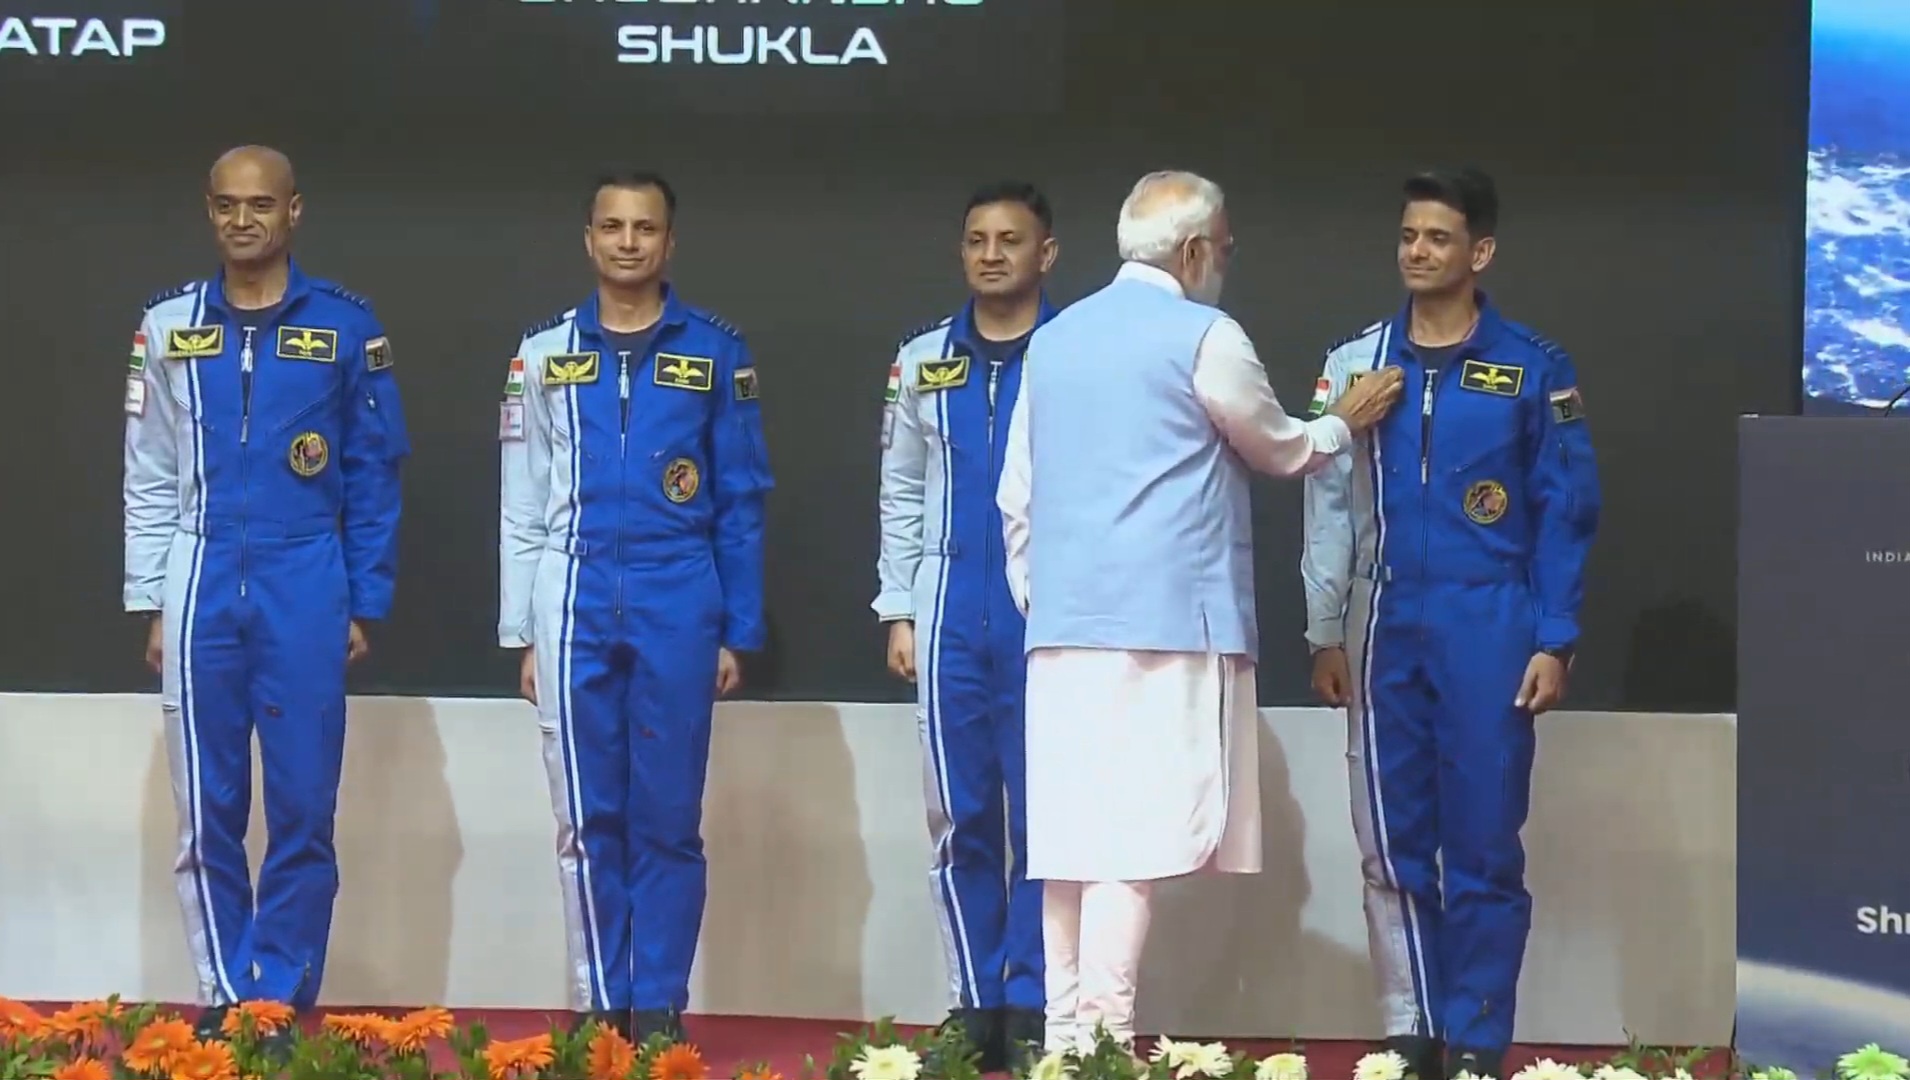 Gaganyaan mission - PM Modi reveals names of astronauts picked for Gaganyaan